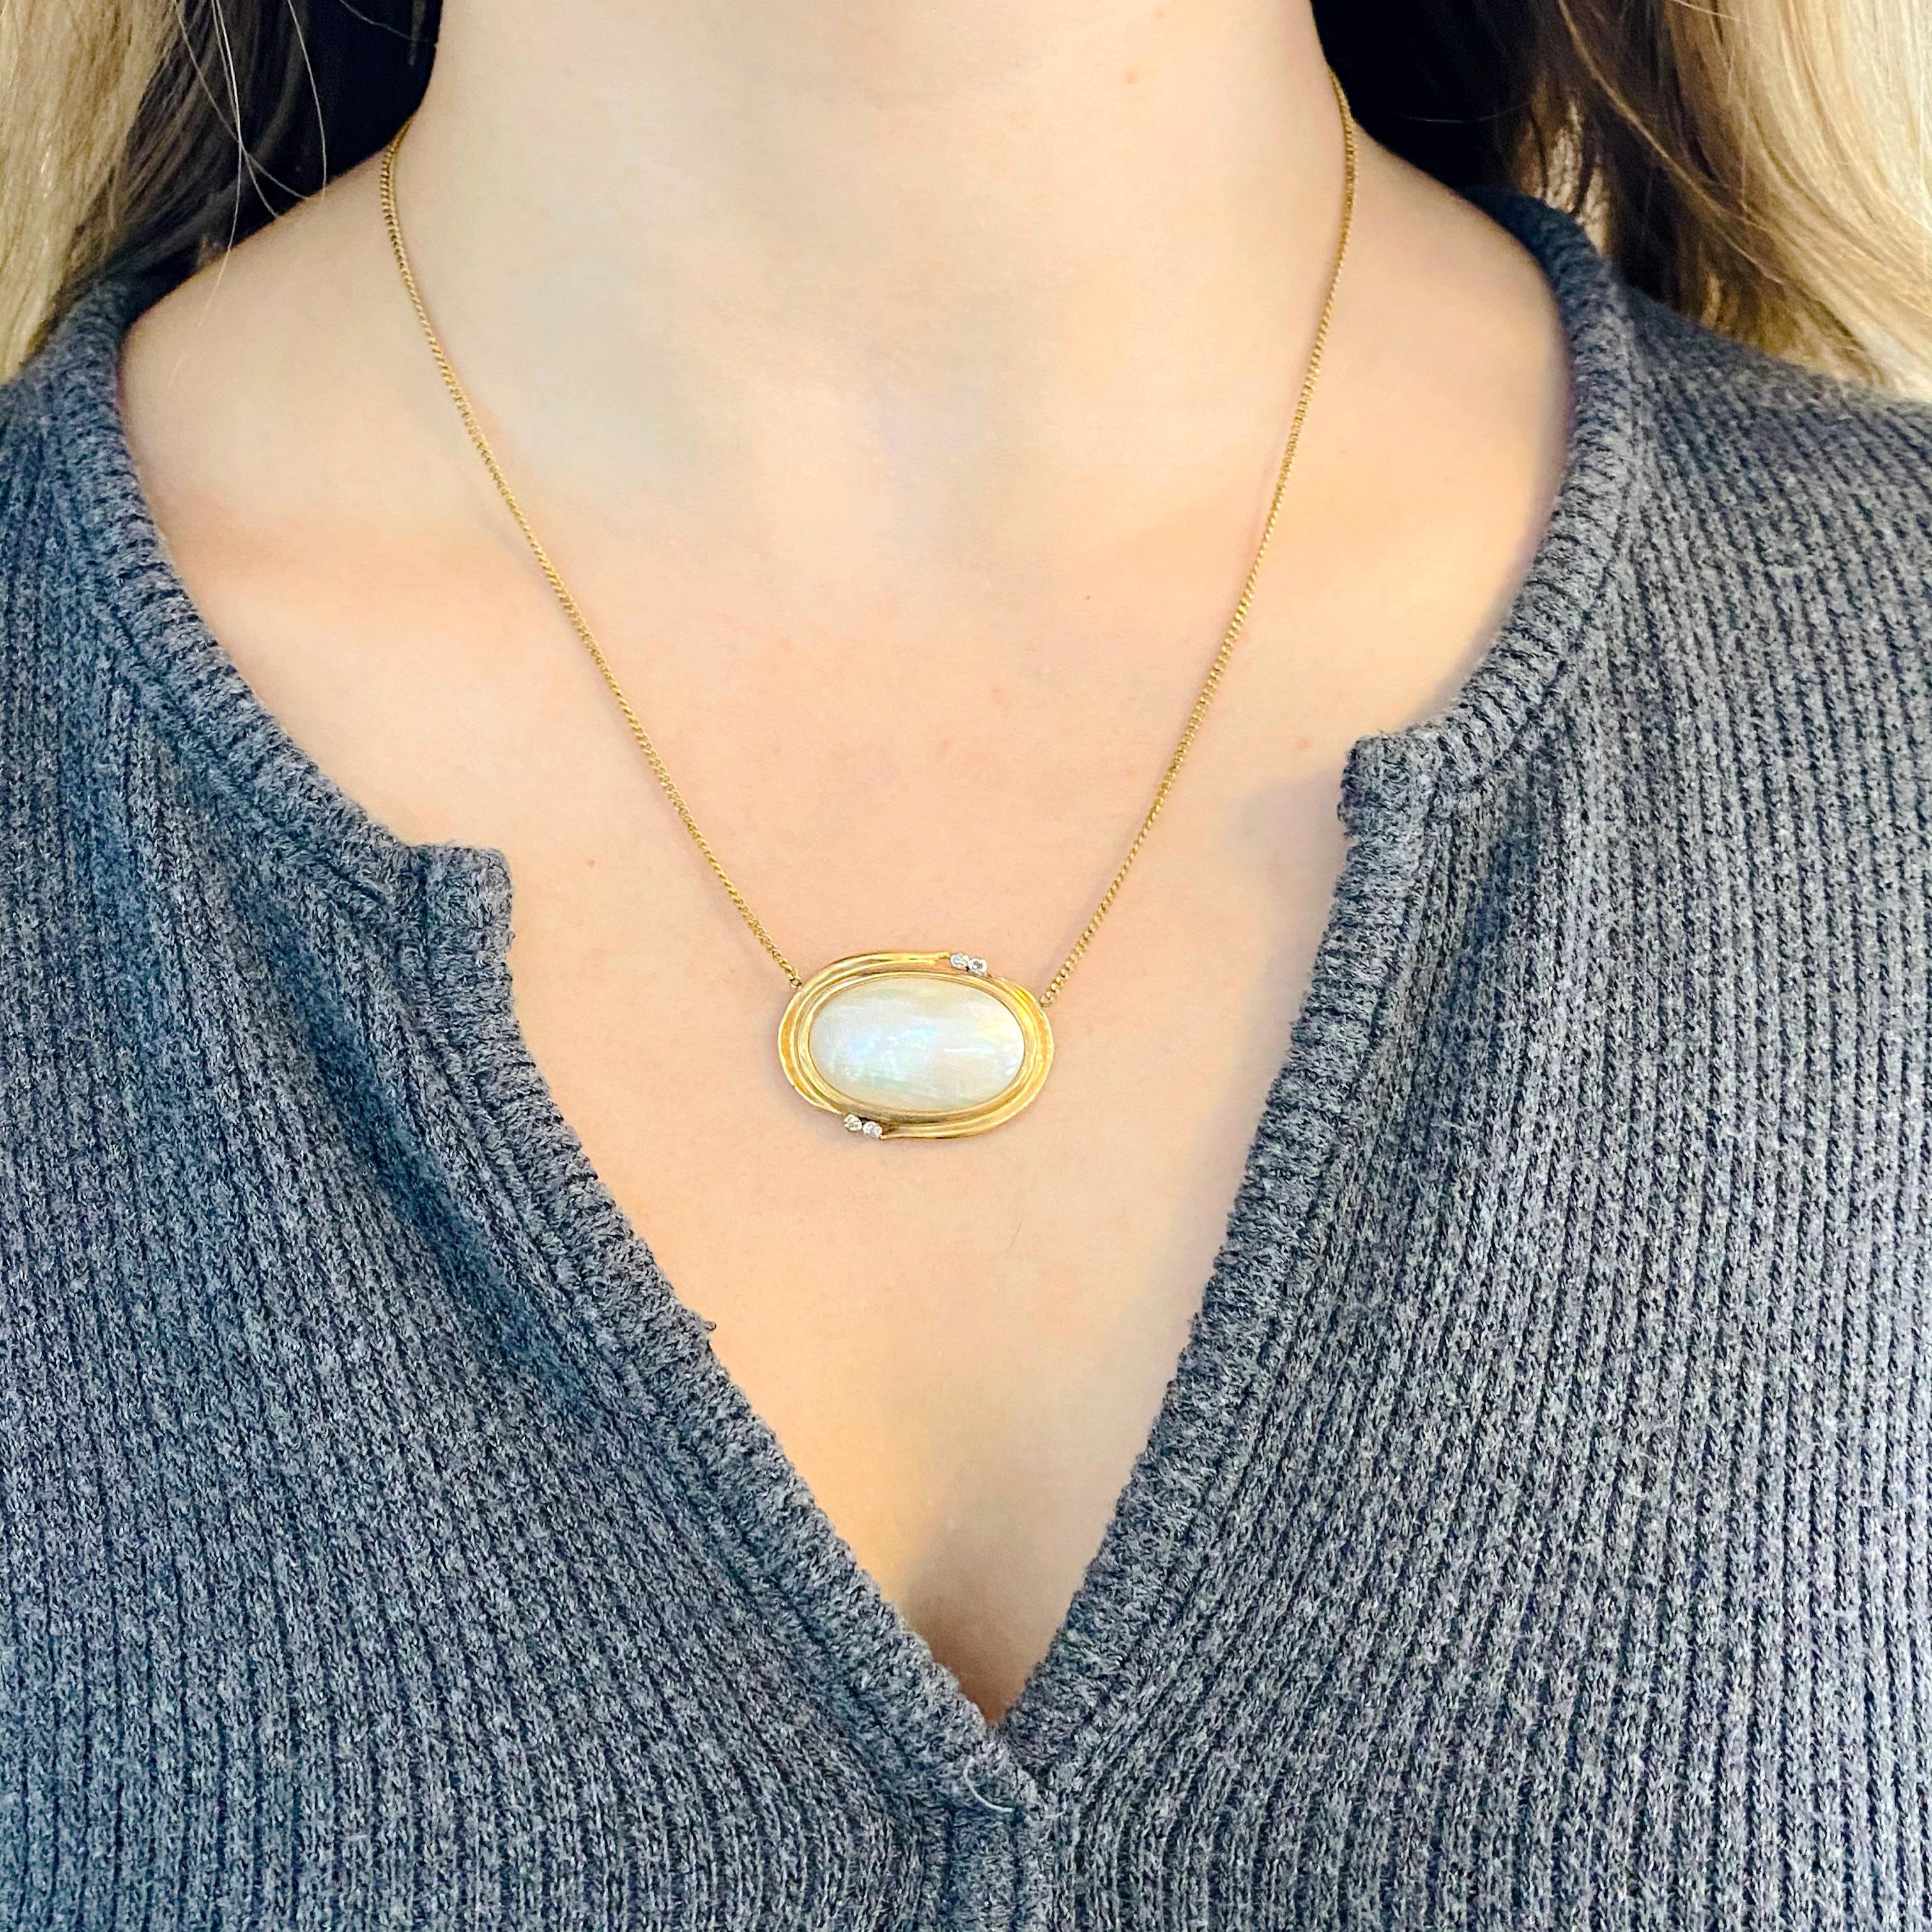 All of our jewelry pieces are skillfully crafted with natural gemstones, The mabe pearl is a beautiful white color and this pearl is extra large, The necklace has four diamonds that accent the pearls nicely.  We pride ourselves in providing